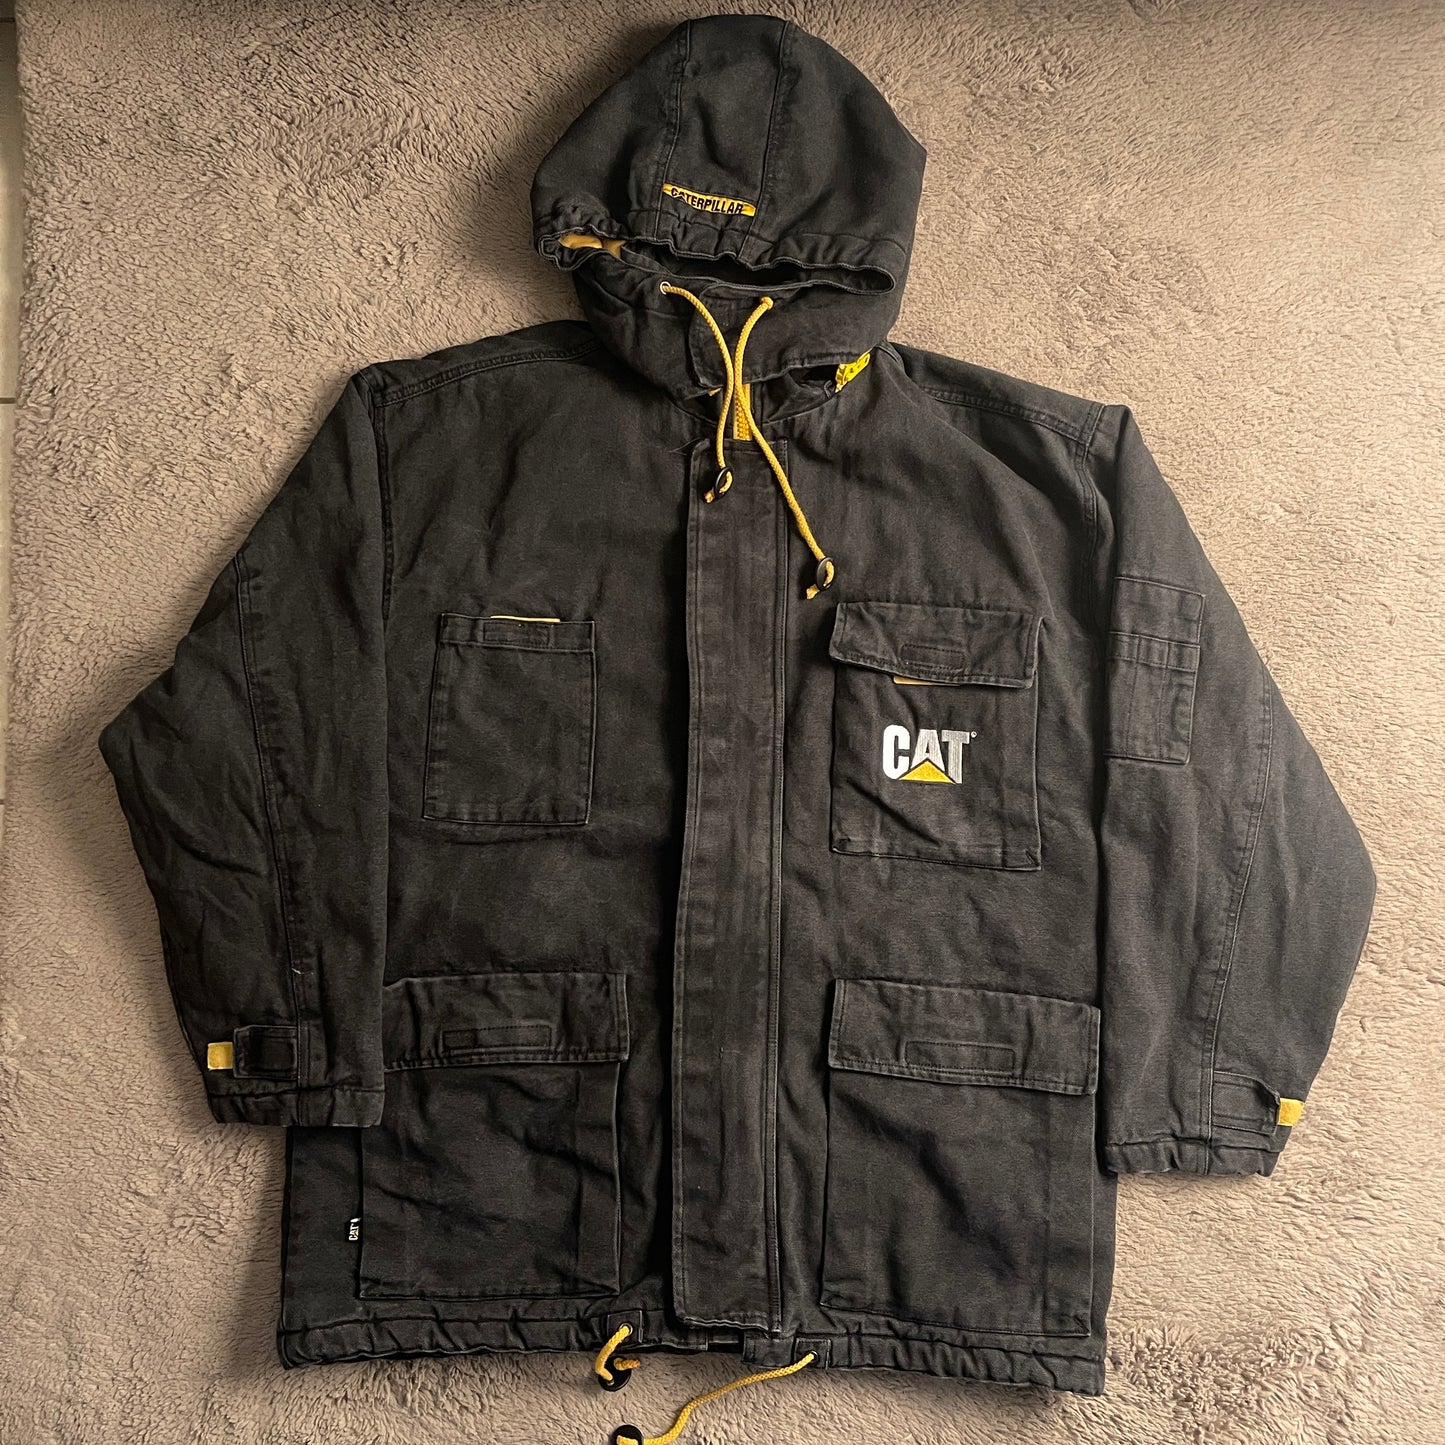 Caterpillar Workwear Hoodie Vintage Jacket (M on tag but fits to XL)